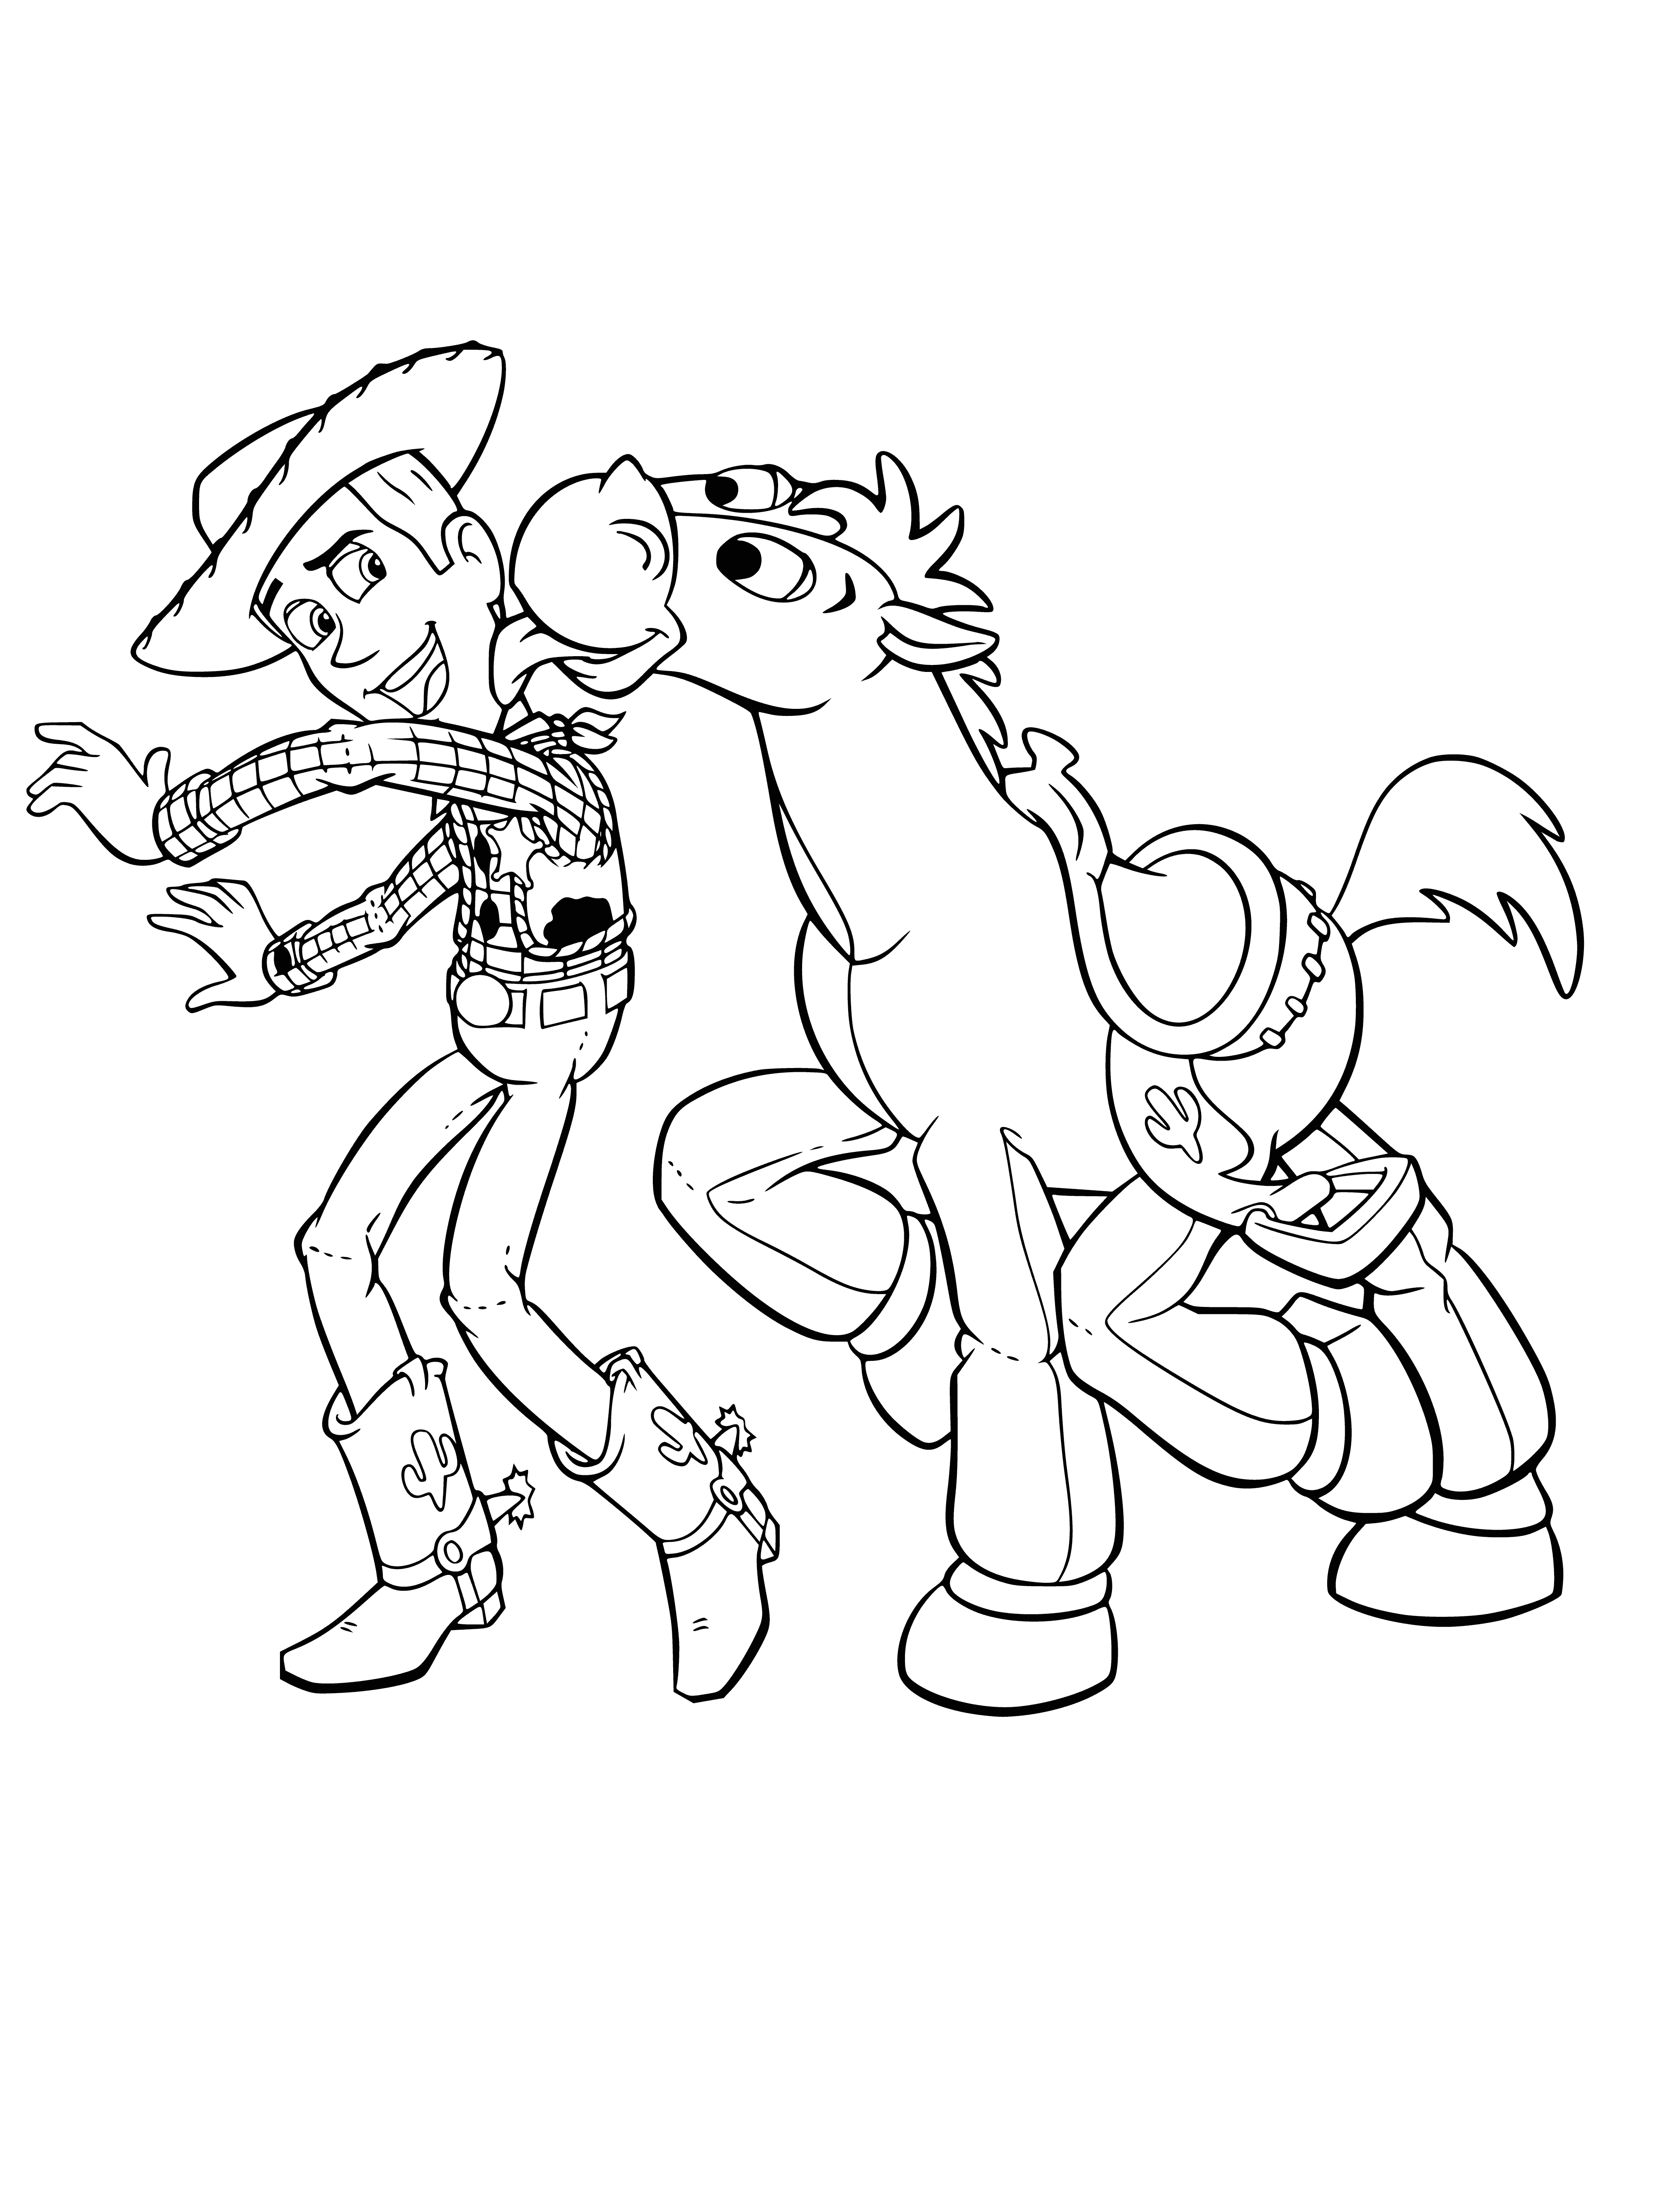 coloring page: Woody and Bulzai are best friends from Disney's "Toy Story" enjoying each other's company in a coloring page.